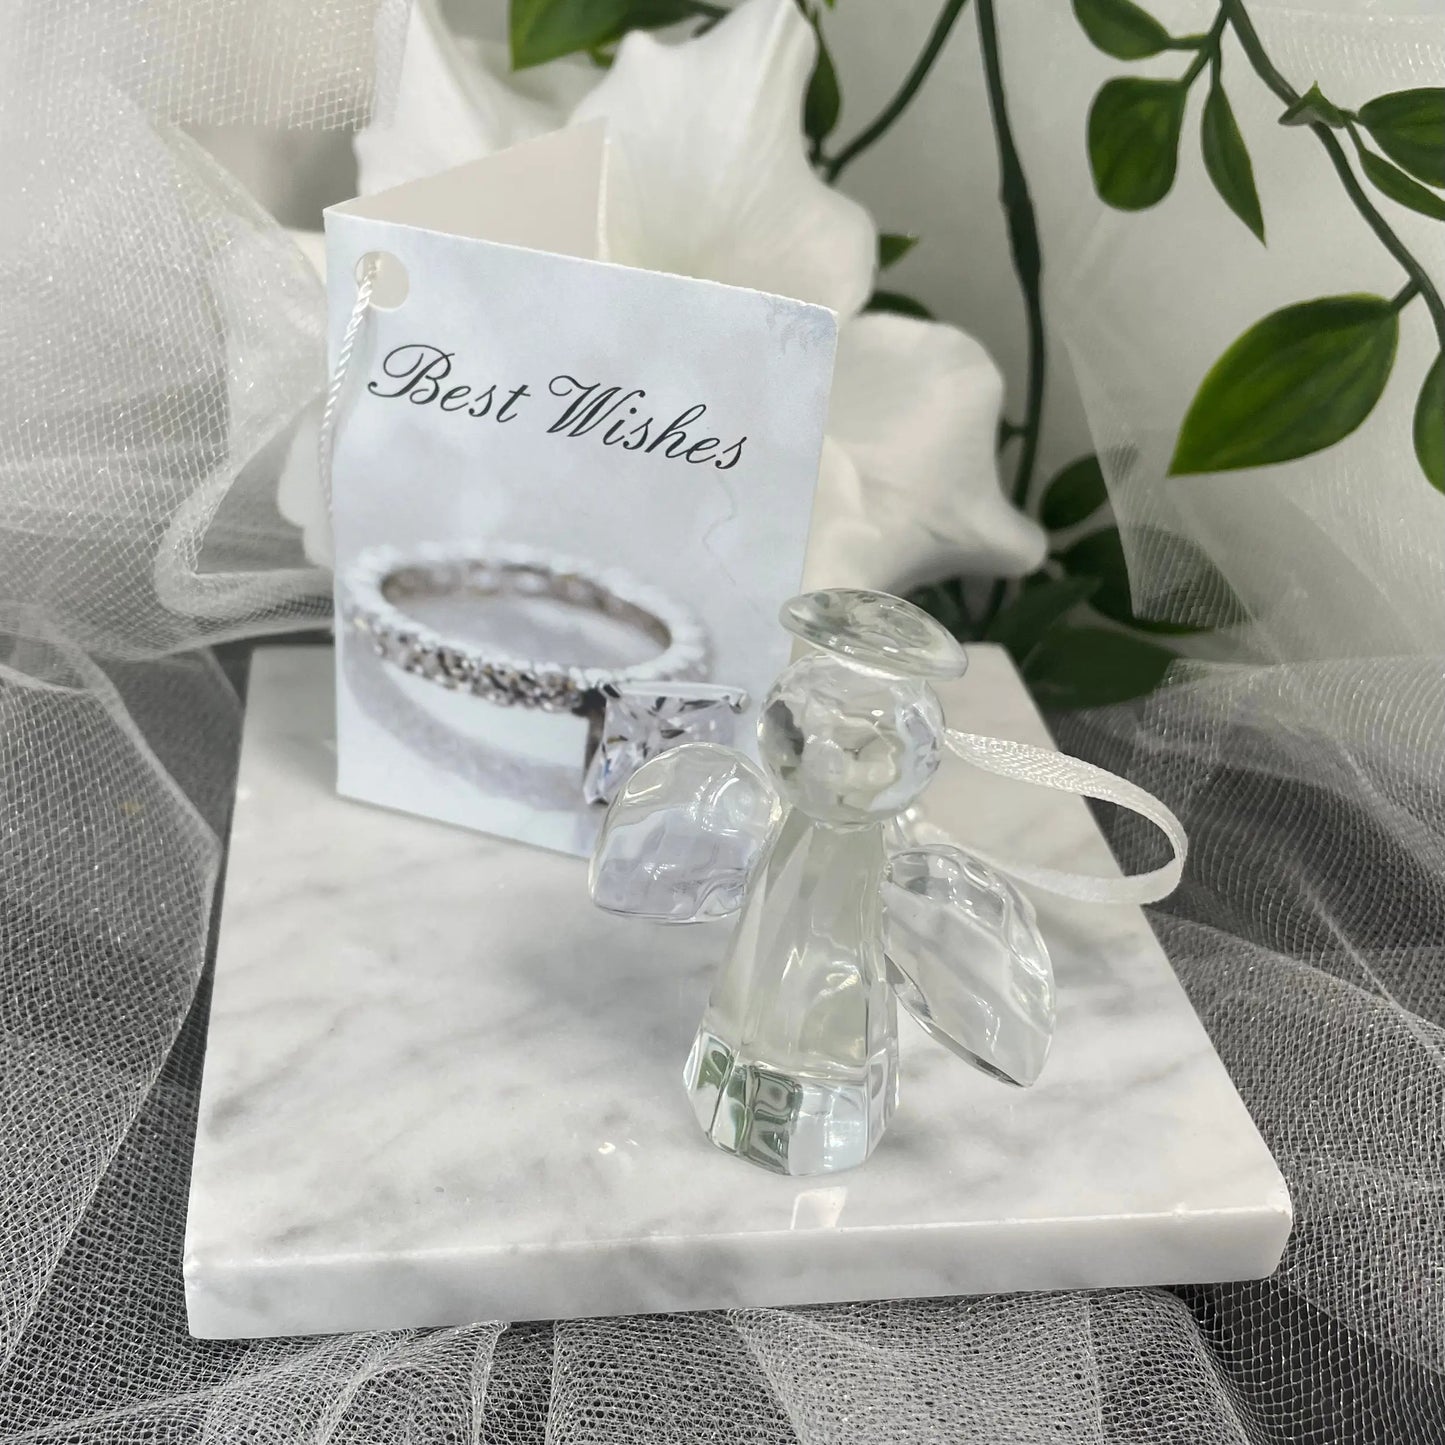 Angel Wrist Charm featuring an intricate design with sparkling crystals, measuring approximately 5.5 cm in height and 4.6 cm in width, perfect for weddings and special occasions.